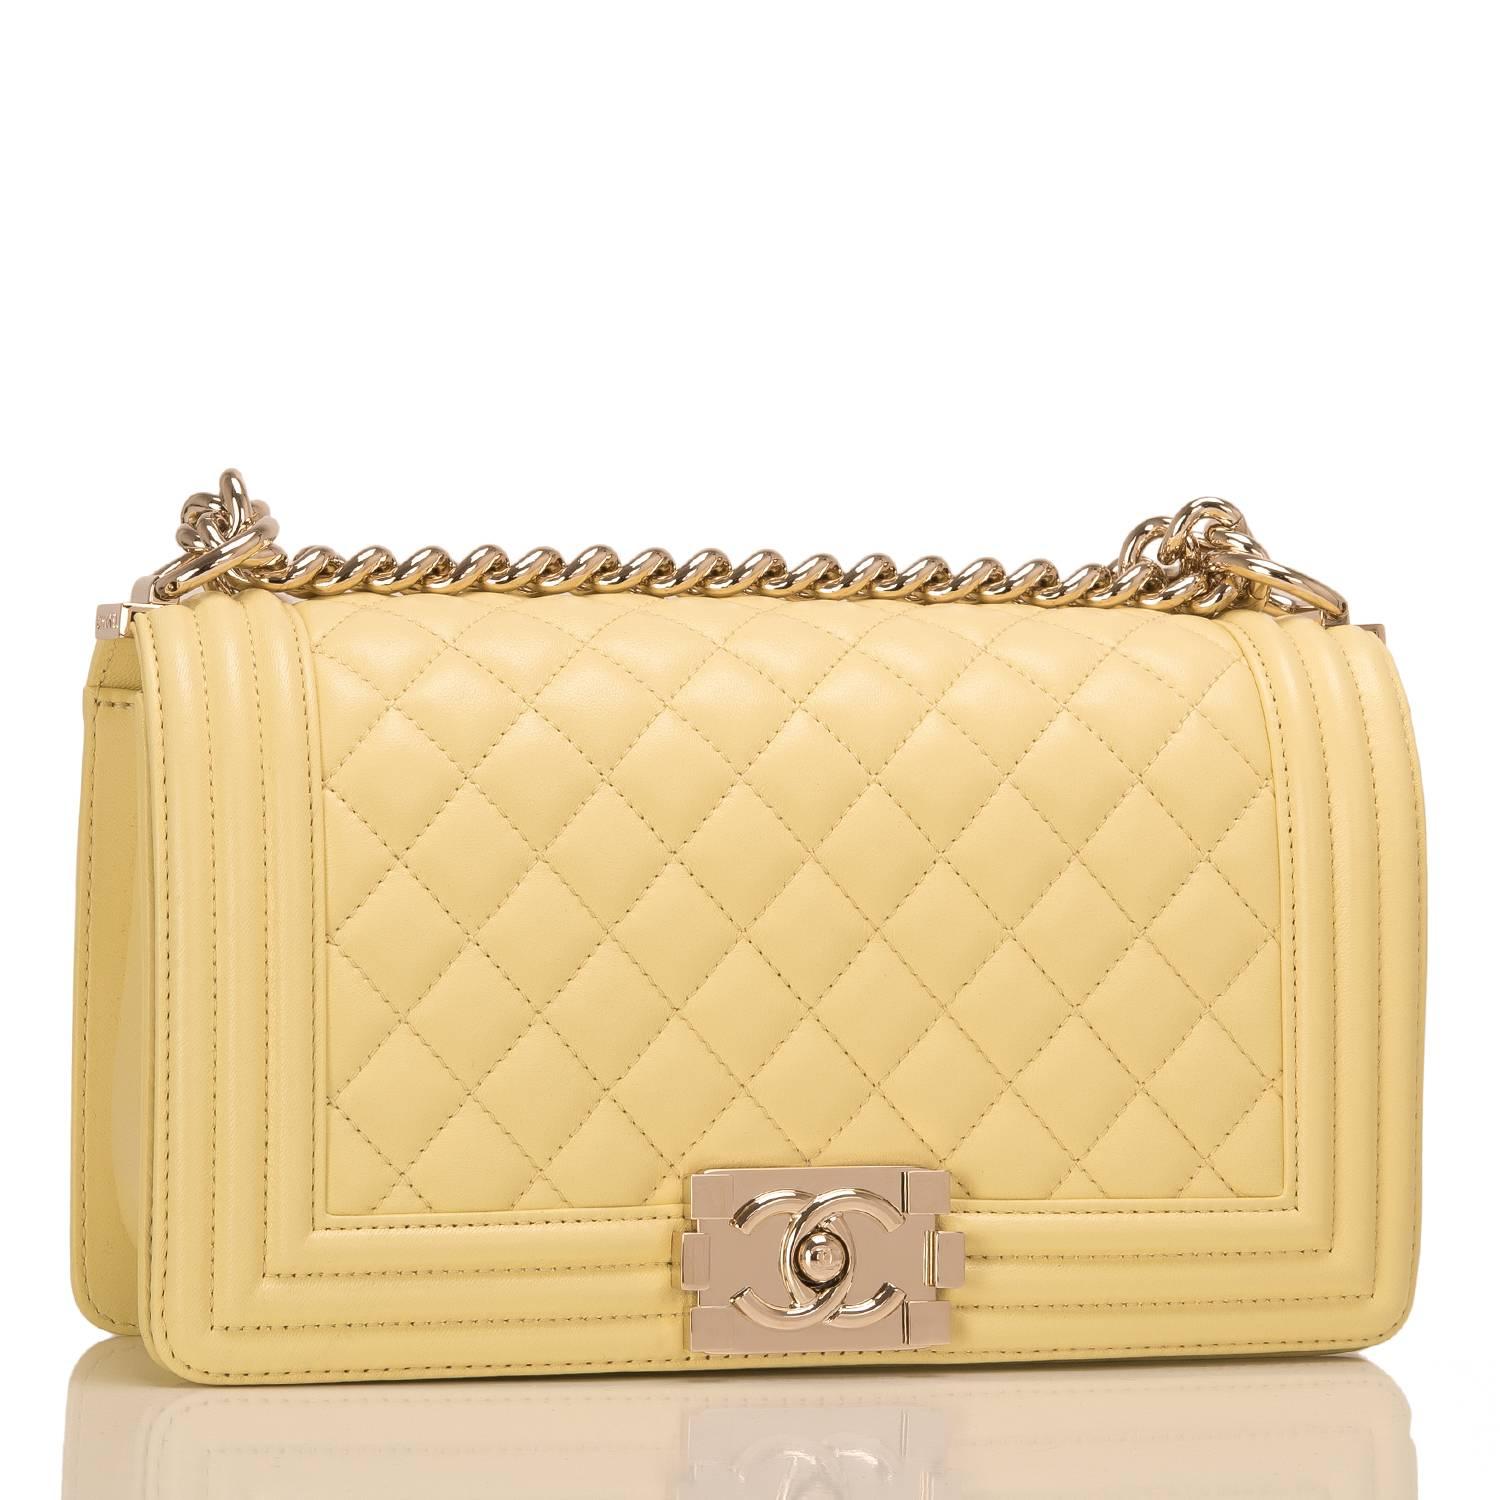 Chanel Medium Boy bag of yellow lambskin leather with light gold tone hardware.

This bag features a full front flap with the Le Boy CC push lock closure and a light gold tone chain link and yellow leather padded shoulder/crossbody strap.

The